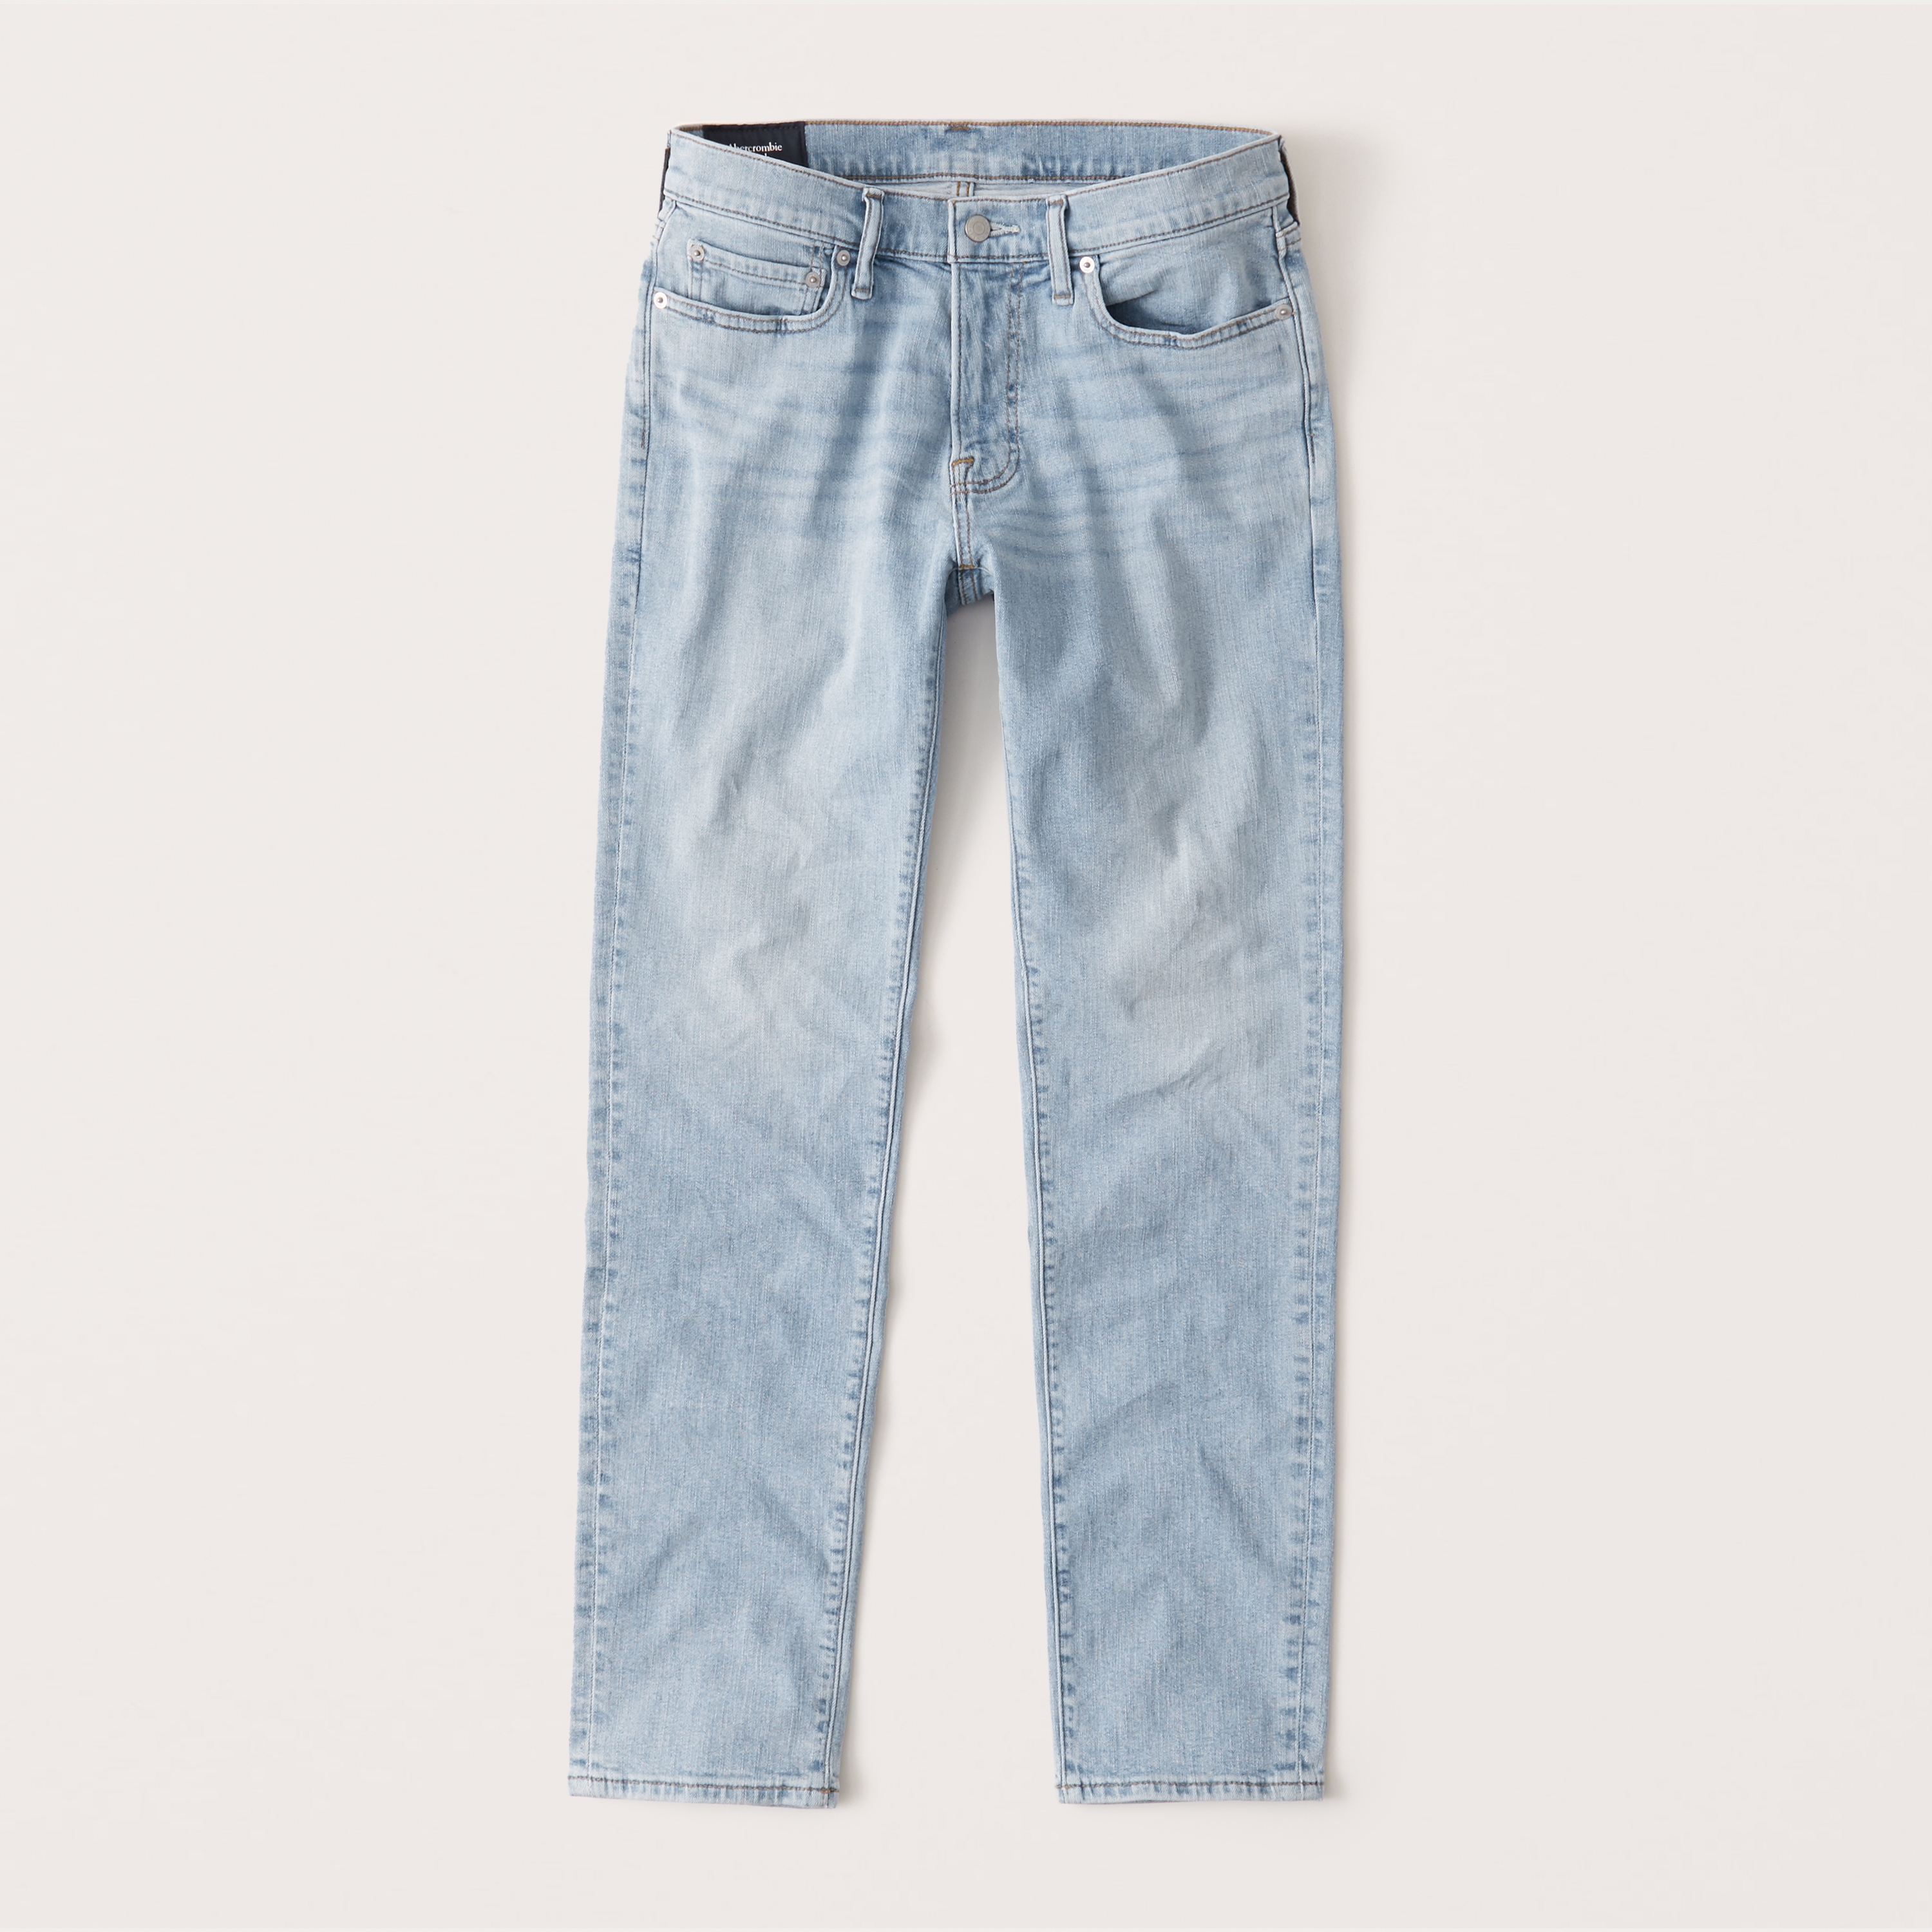 abercrombie and fitch jeans sale